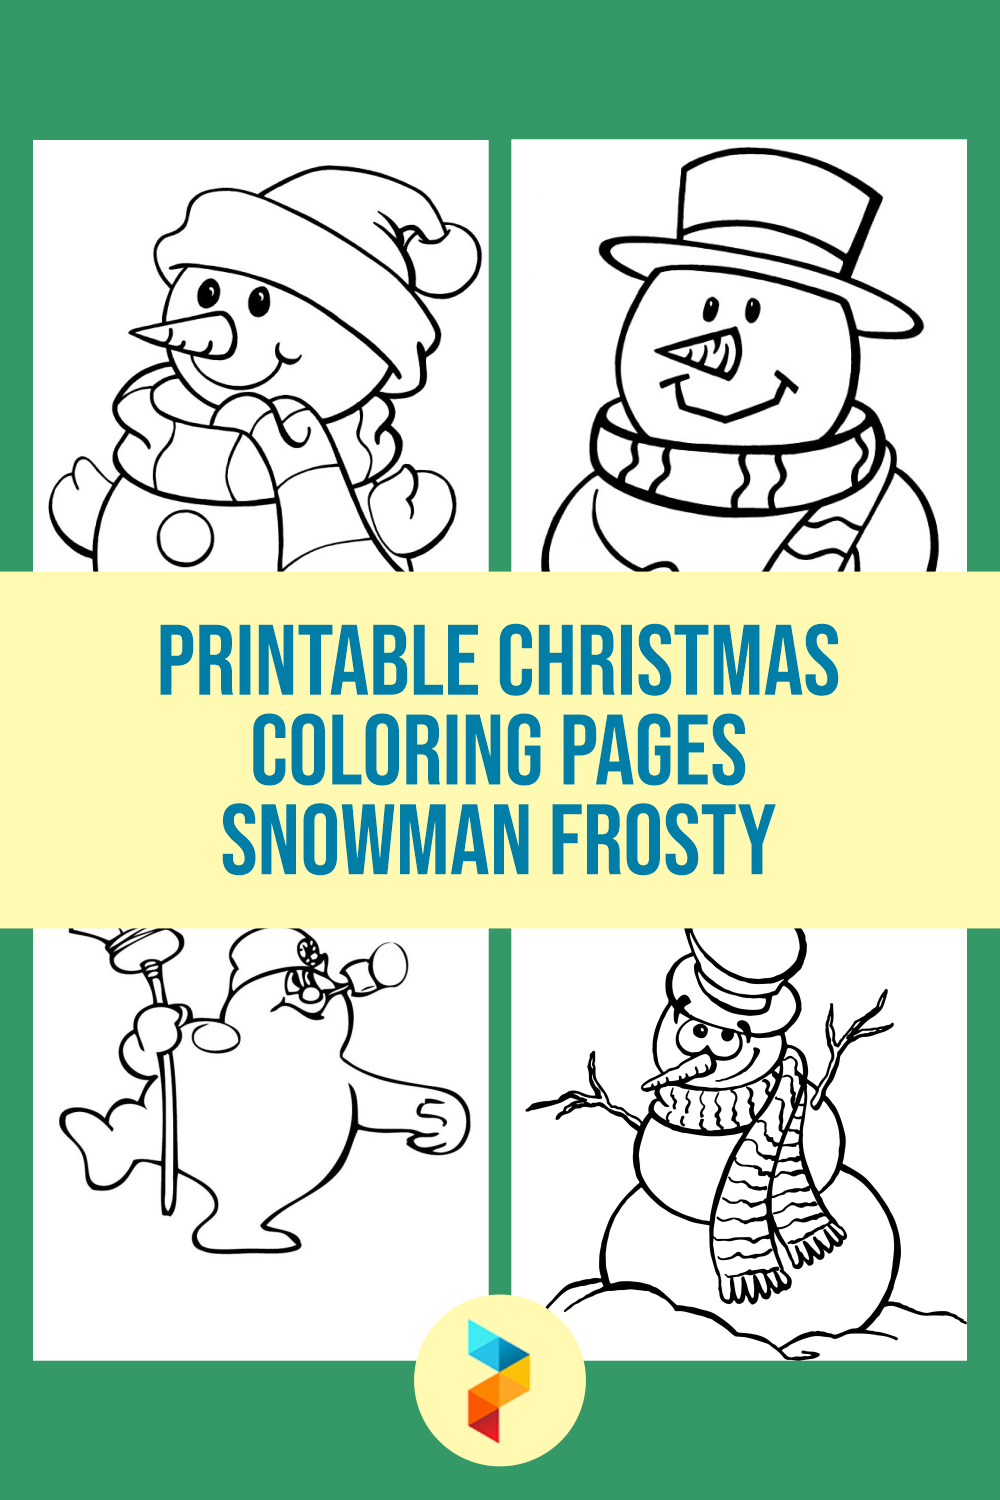 Printable Christmas Coloring Pages Snowman Frosty